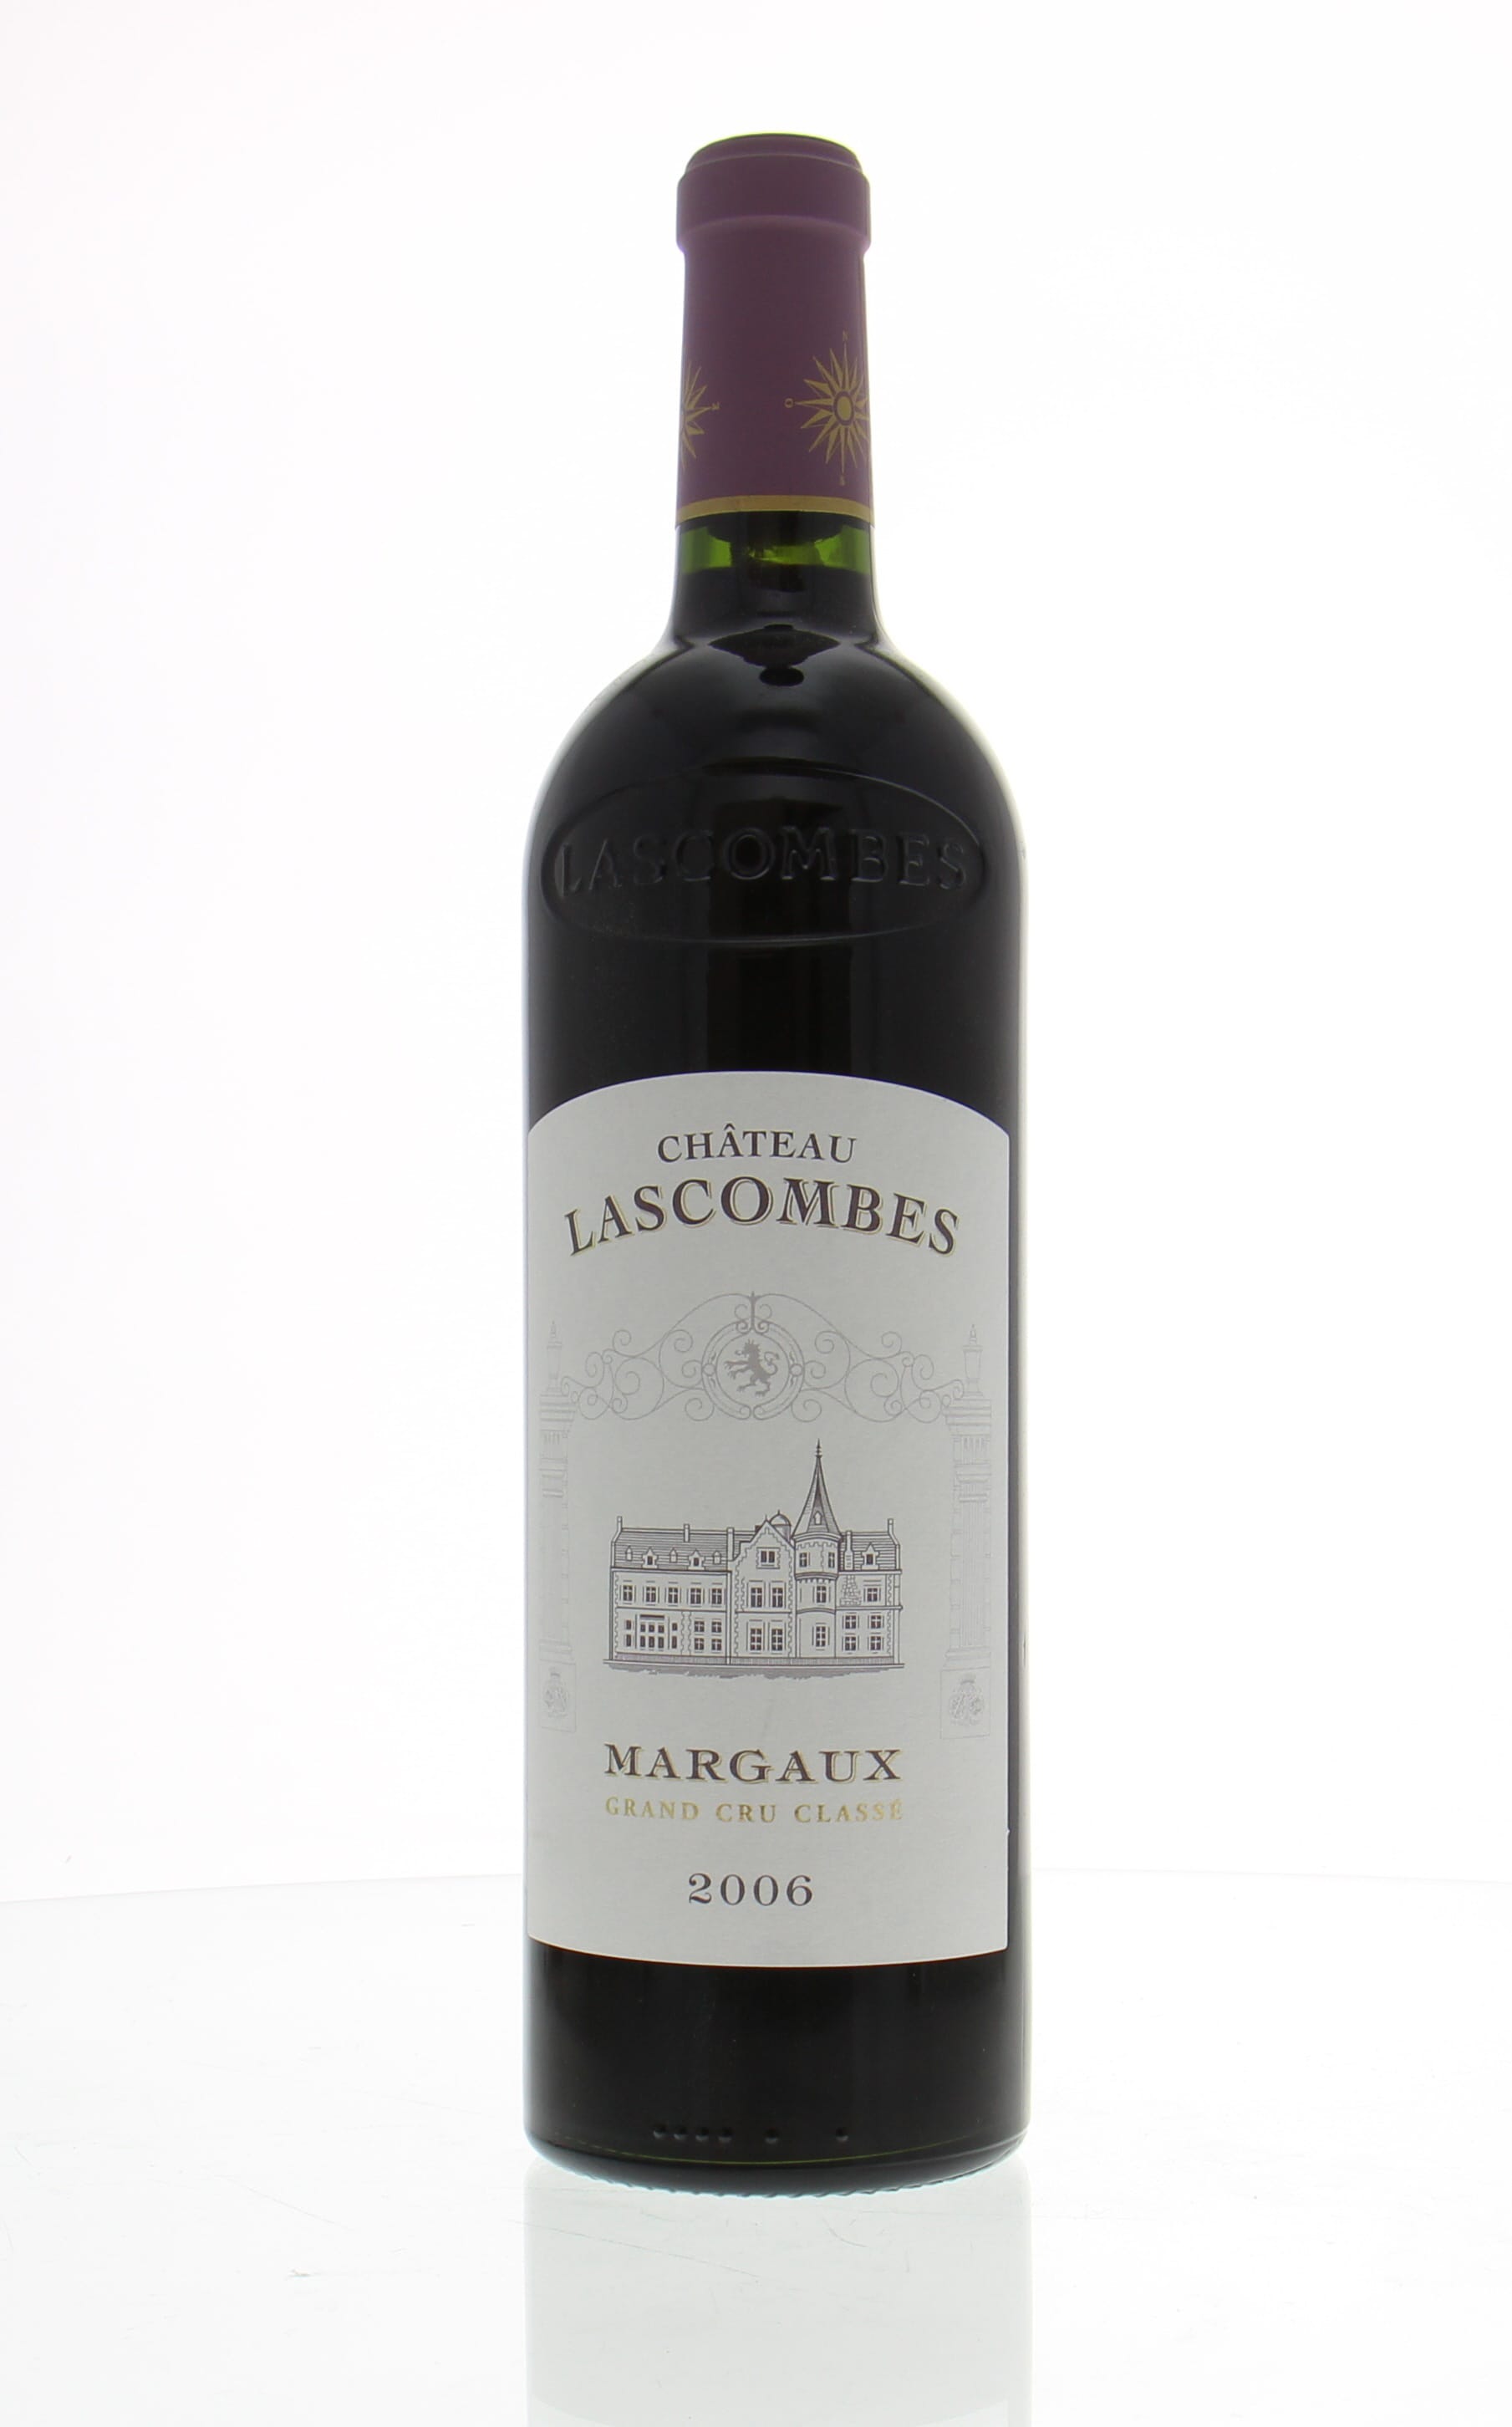 Chateau Lascombes - Chateau Lascombes 2006 perfect